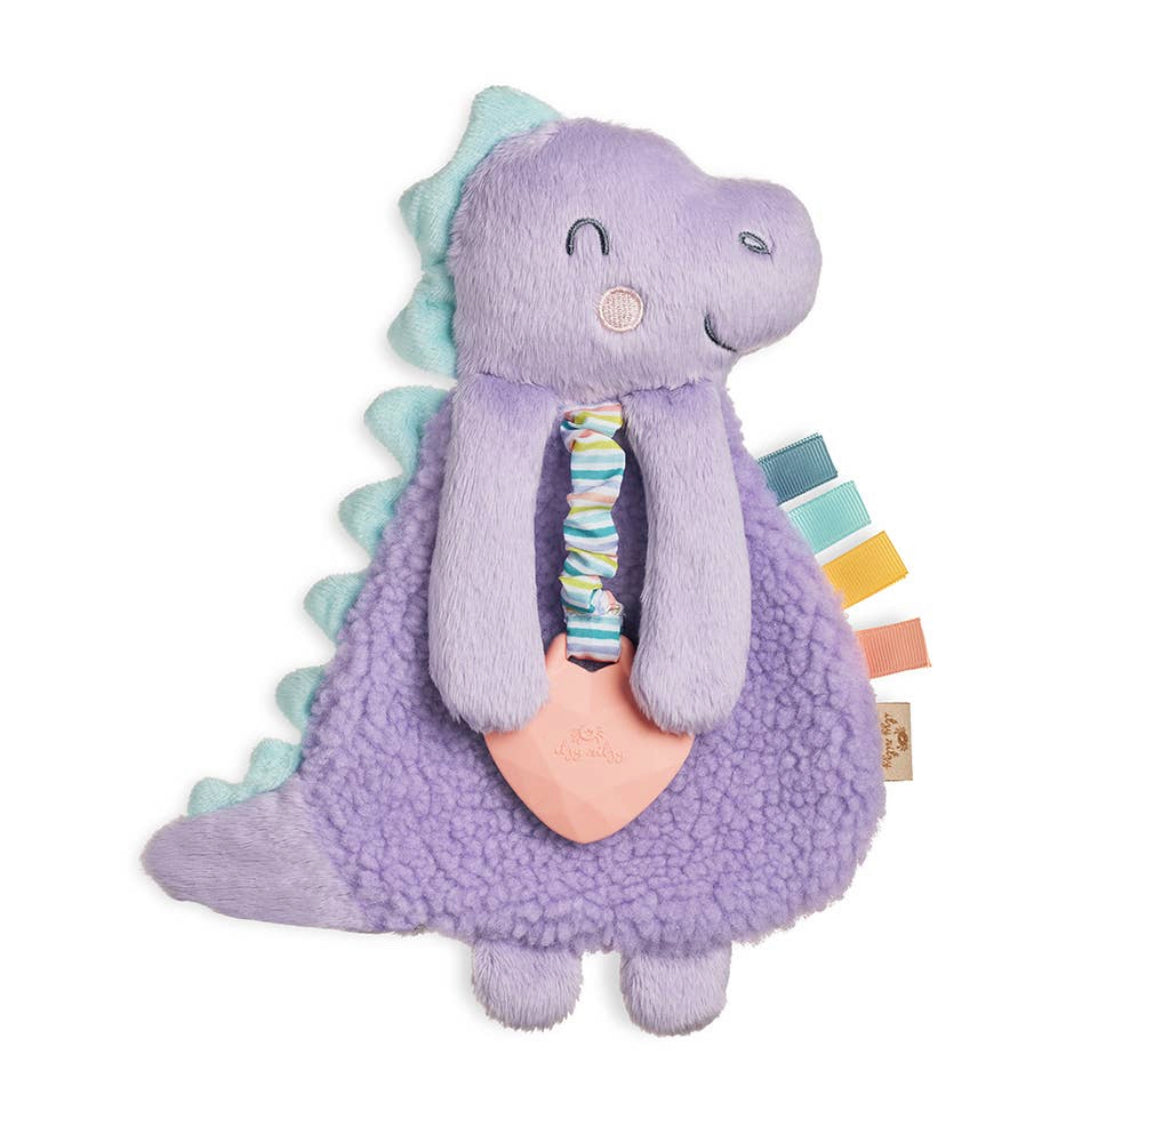 Itzy Ritzy: Itzy Friends Itzy Lovey Plush with Silicone Teether Toy